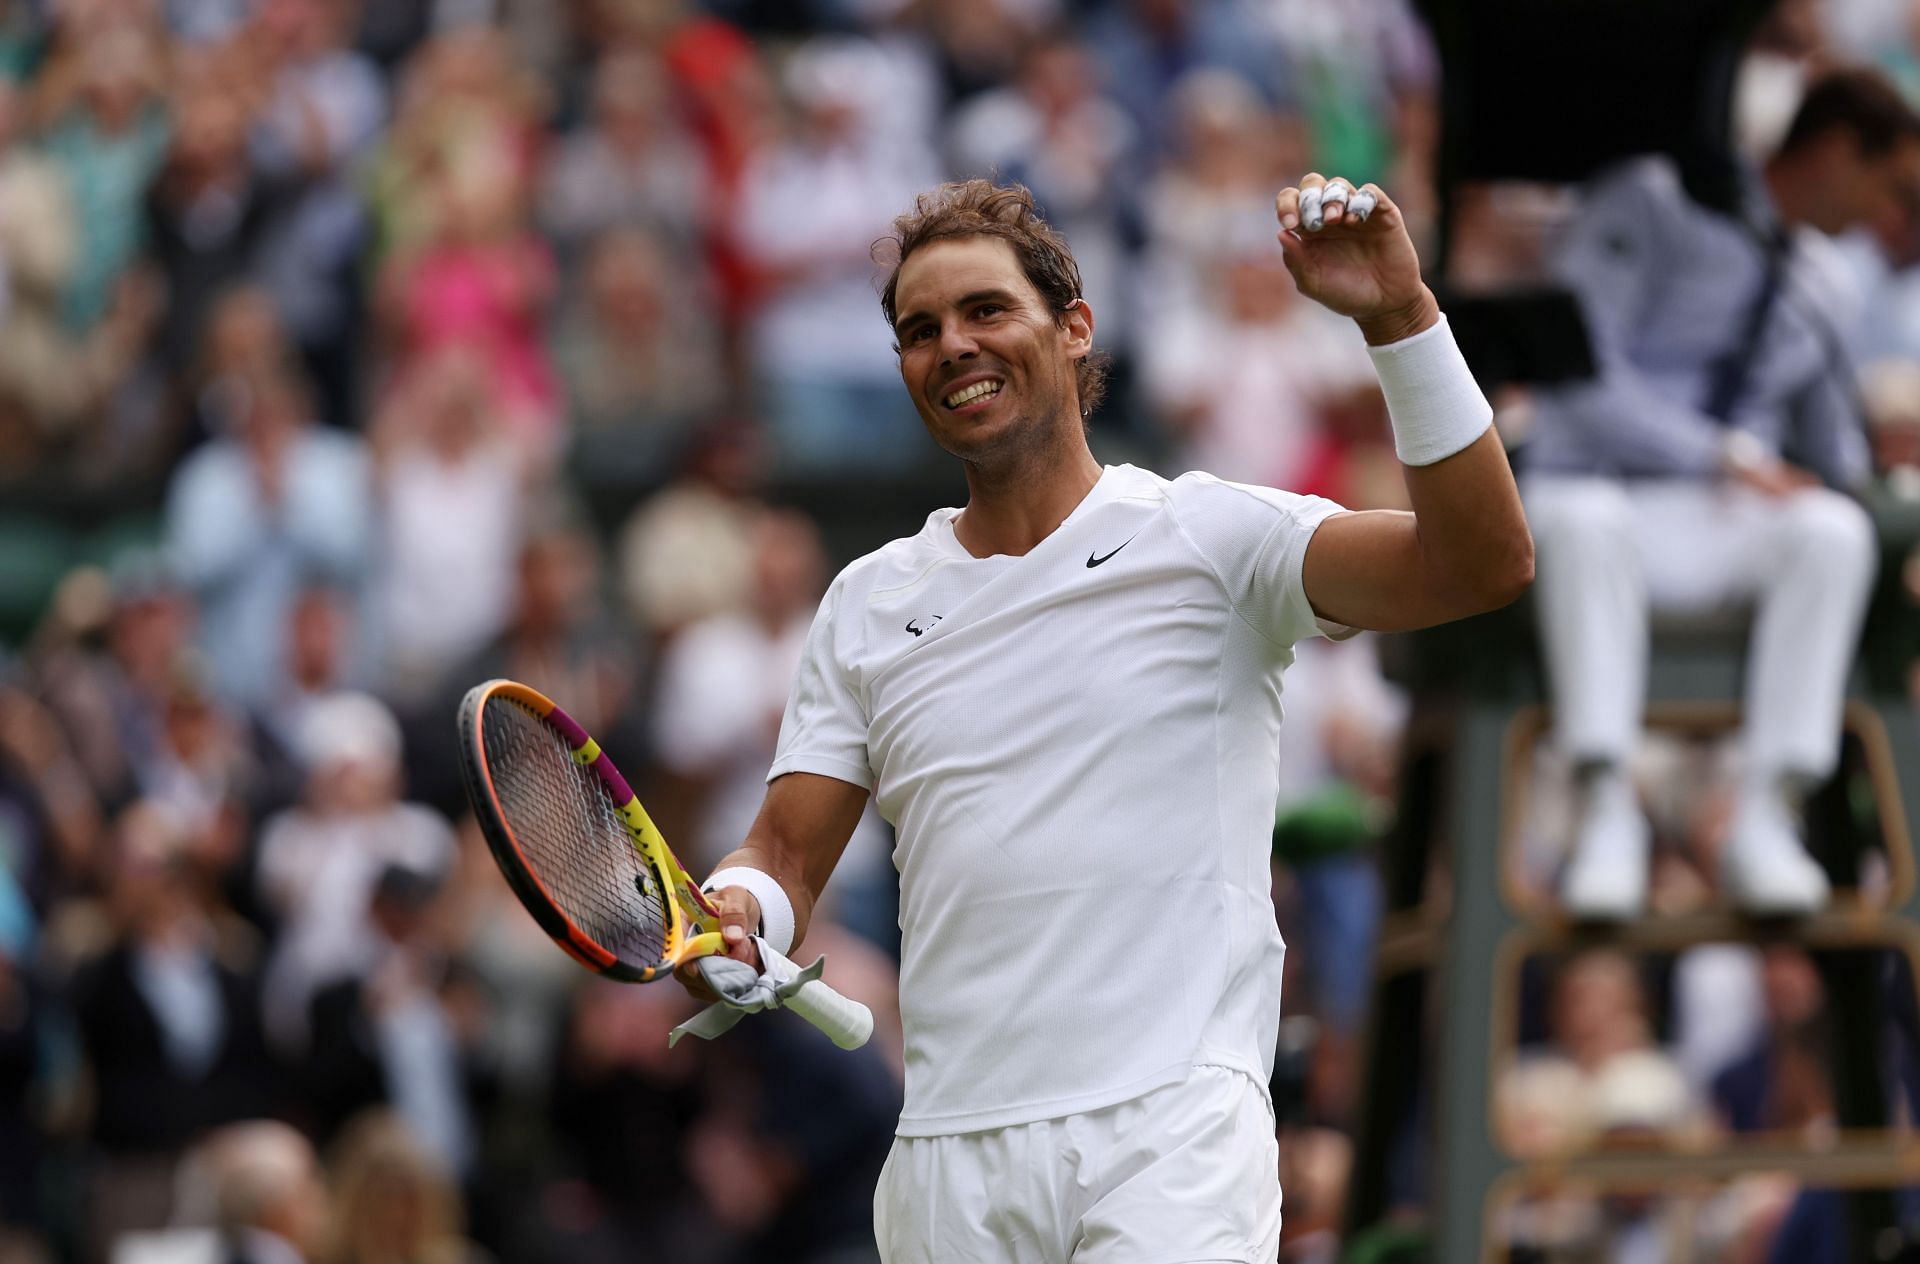 Rafael Nadal faces off against Ricardas Berankis in the second round at Wimbledon